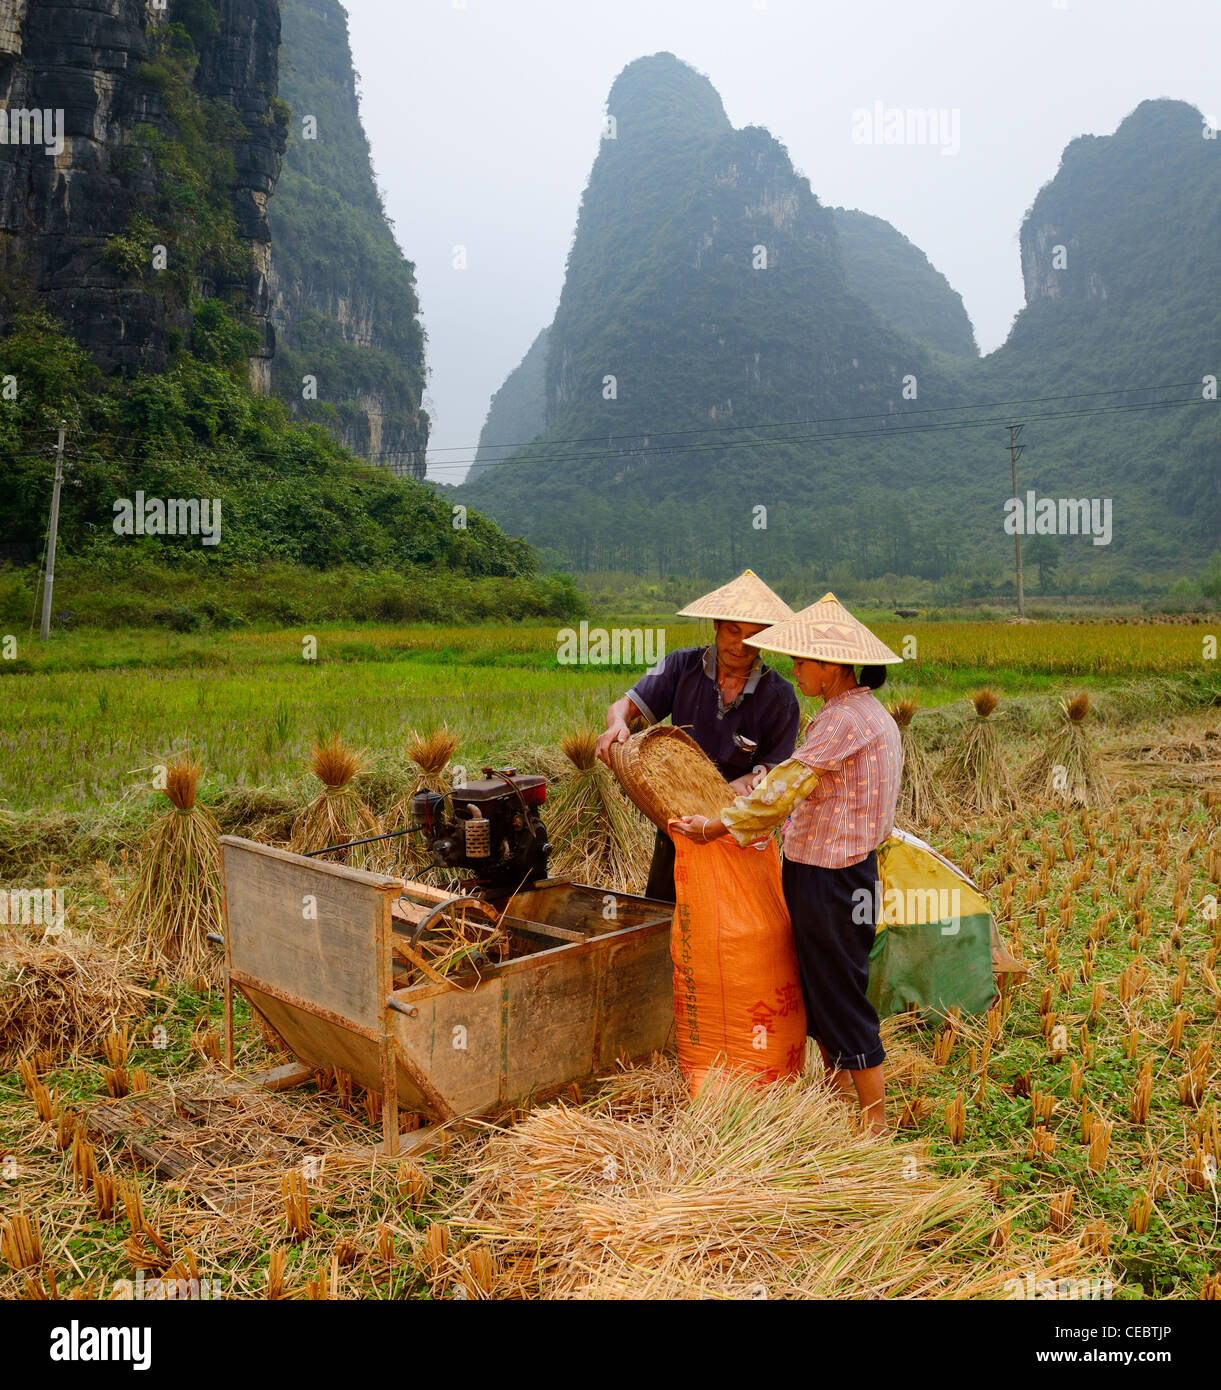 Husband and wife farmers bagging harvested rice crop in field with Karst limestone peaks near Yangshuo Peoples Republic of China Stock Photo